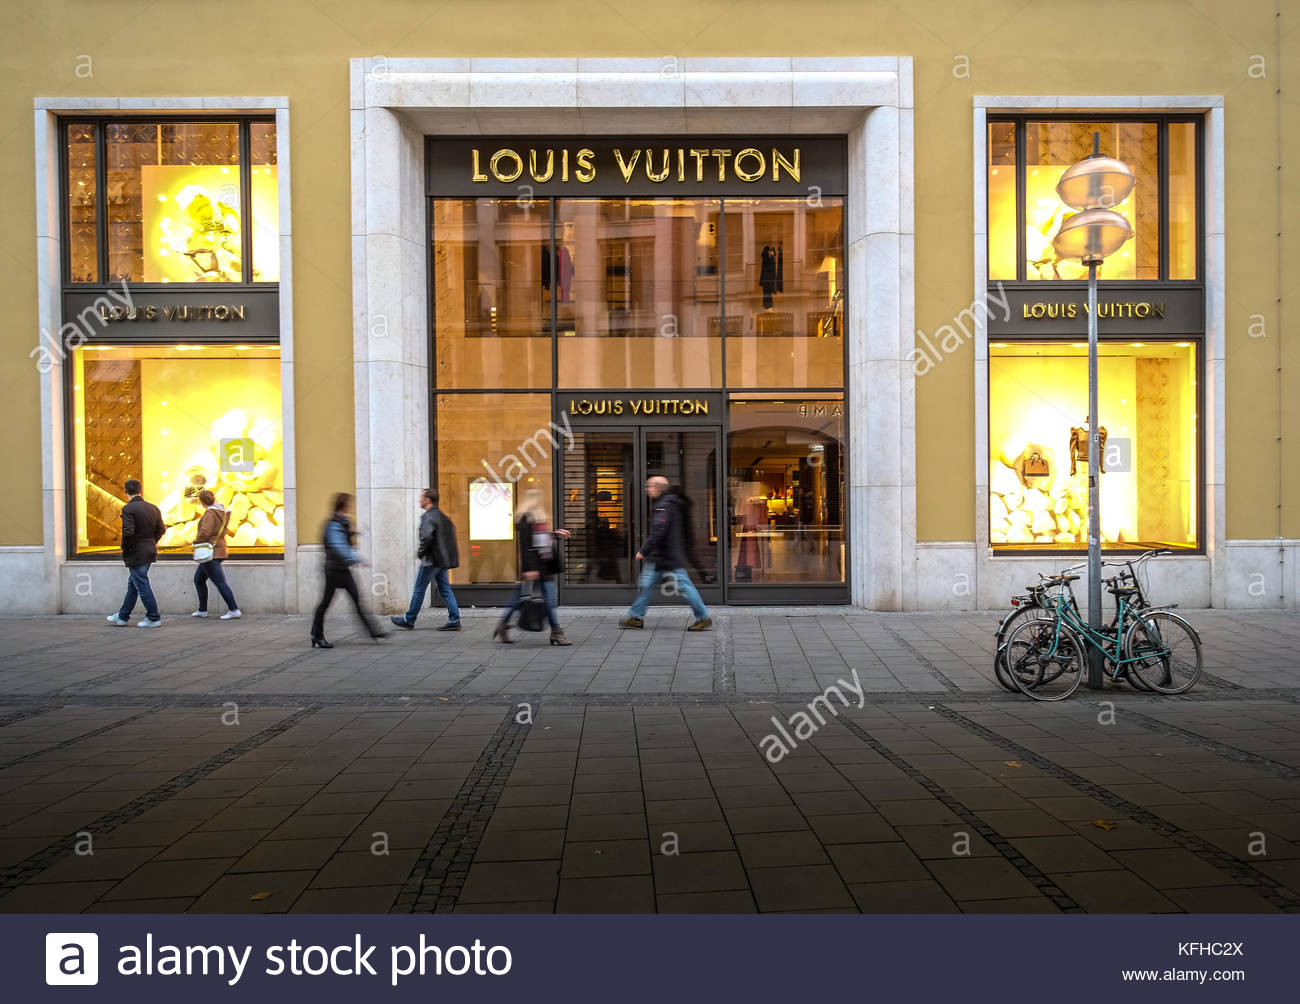 Lv Store Stock Photos & Lv Store Stock Images - Alamy